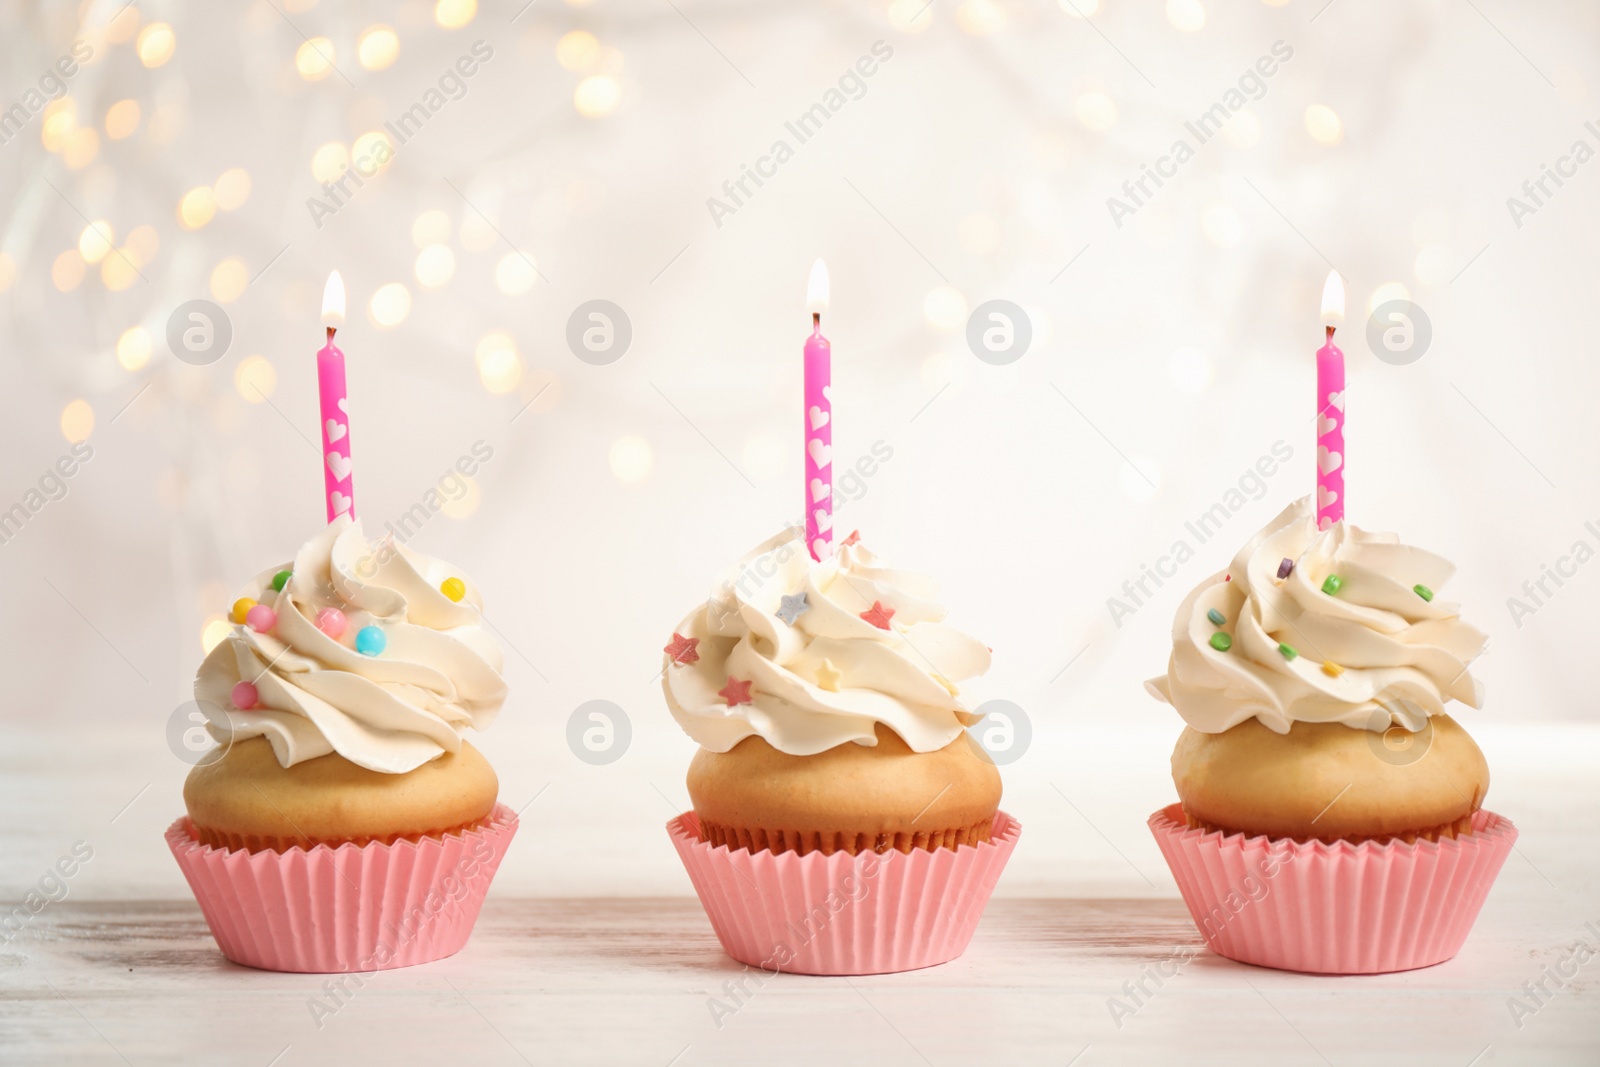 Photo of Birthday cupcakes with candles on white wooden table against blurred lights